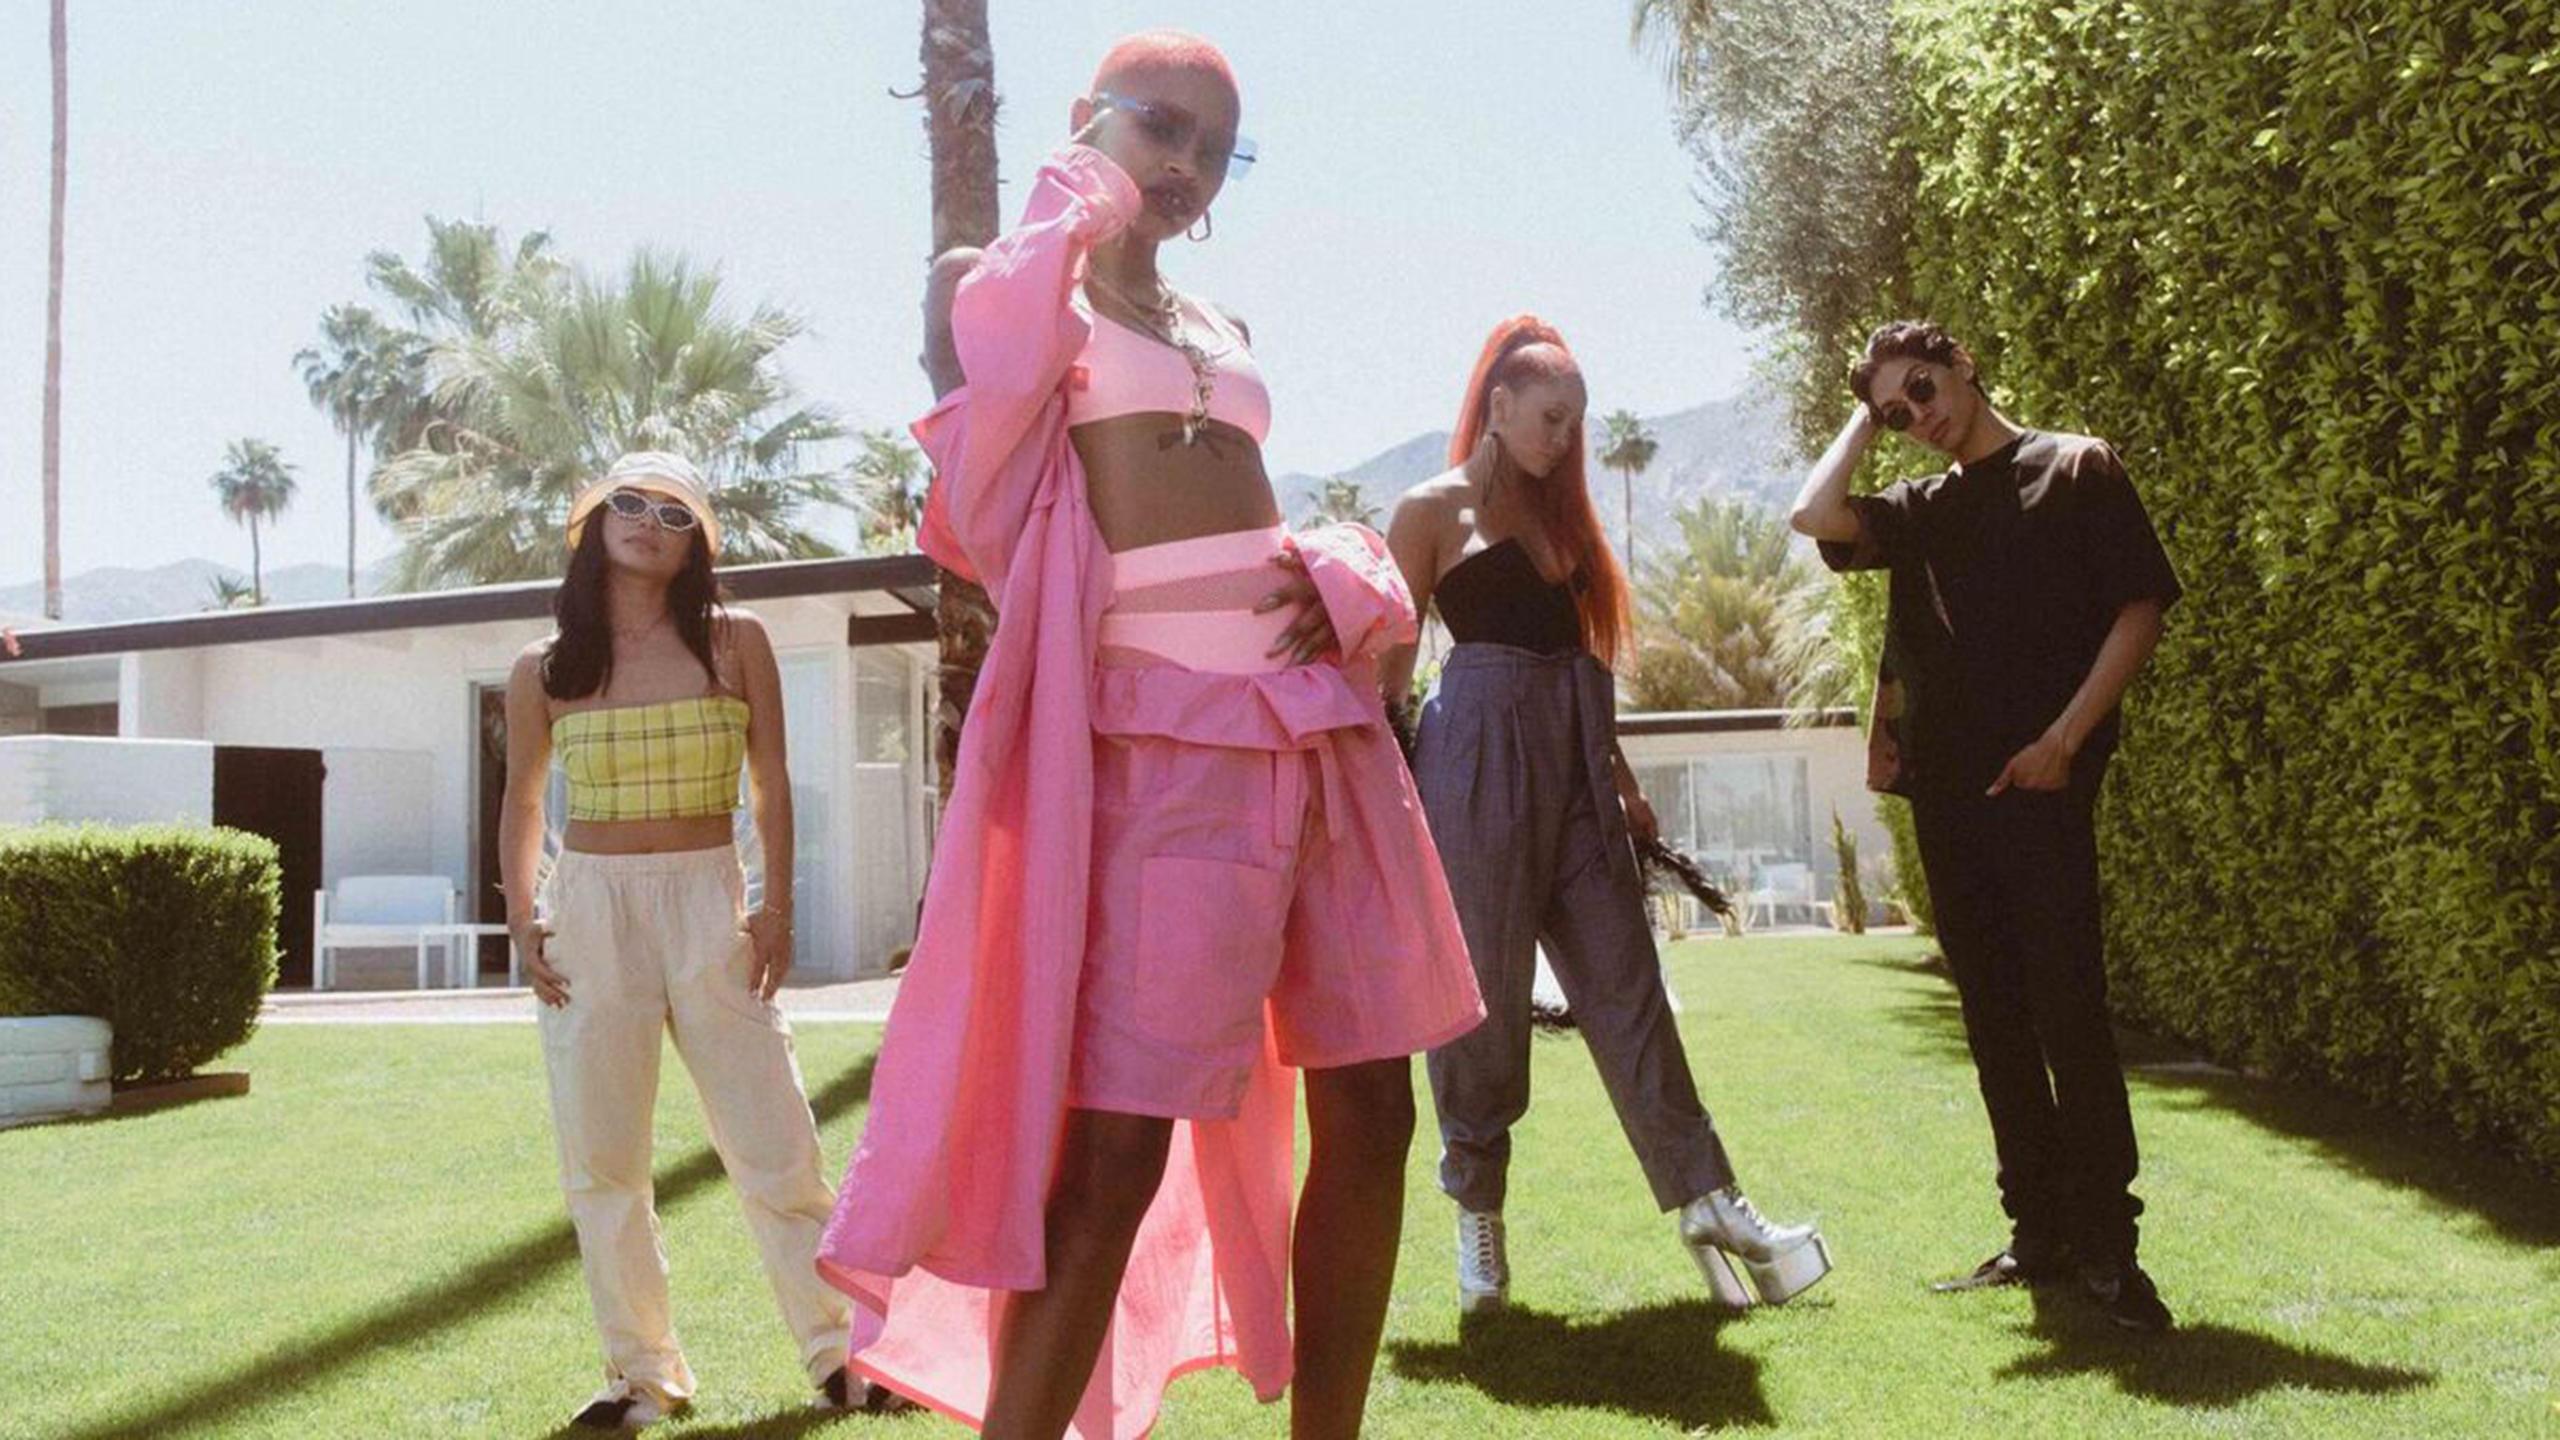 WeWonder with Slick Woods in Palm Springs